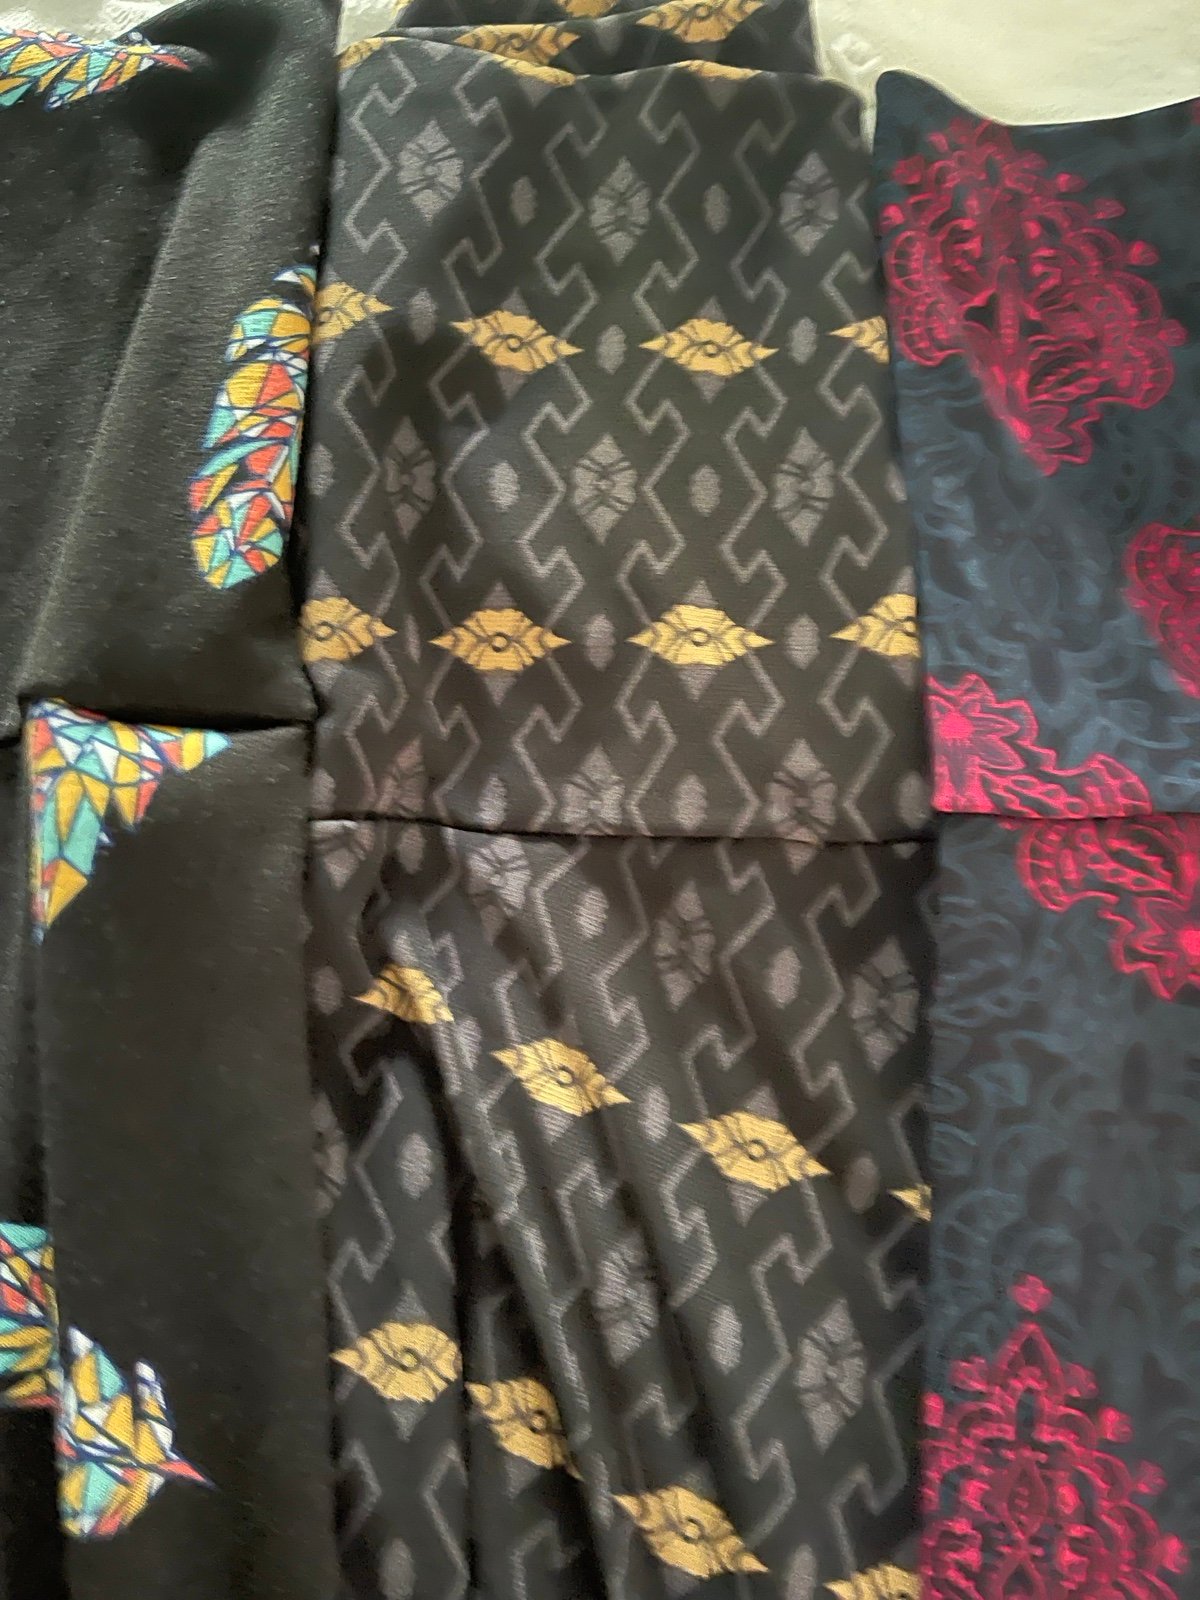 Discounted Lularoe Women’s Maxi Skirts Long Like New Size Small Ma3g5koTN just for you